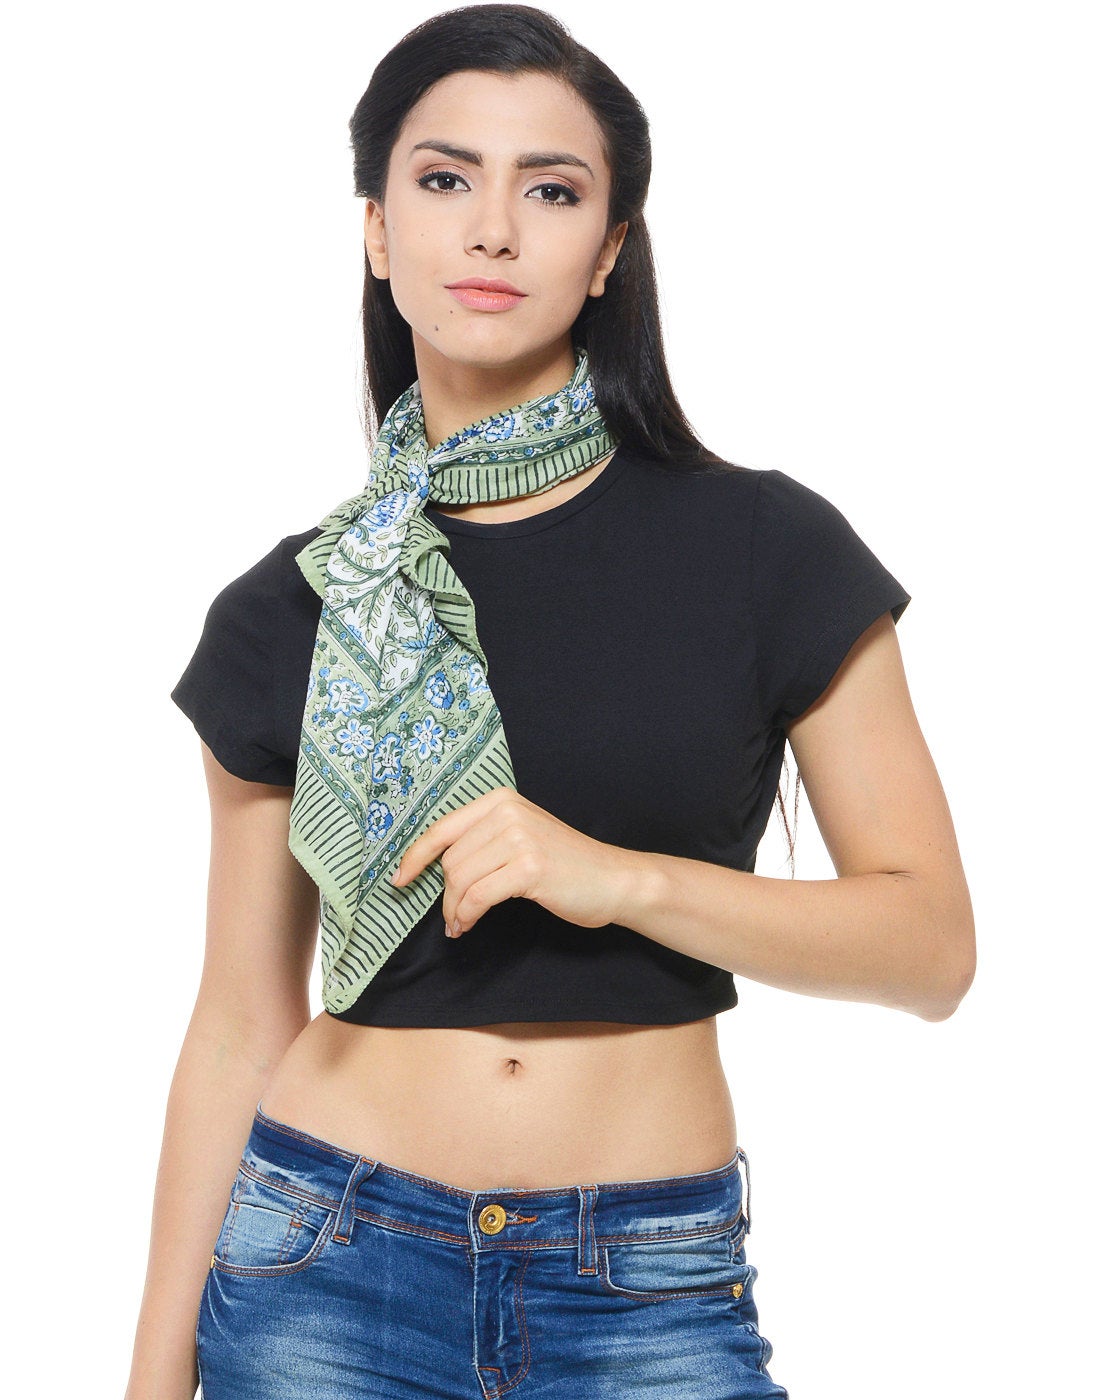 Soft cotton hand block printed scarf in white with blue floral & green leaves